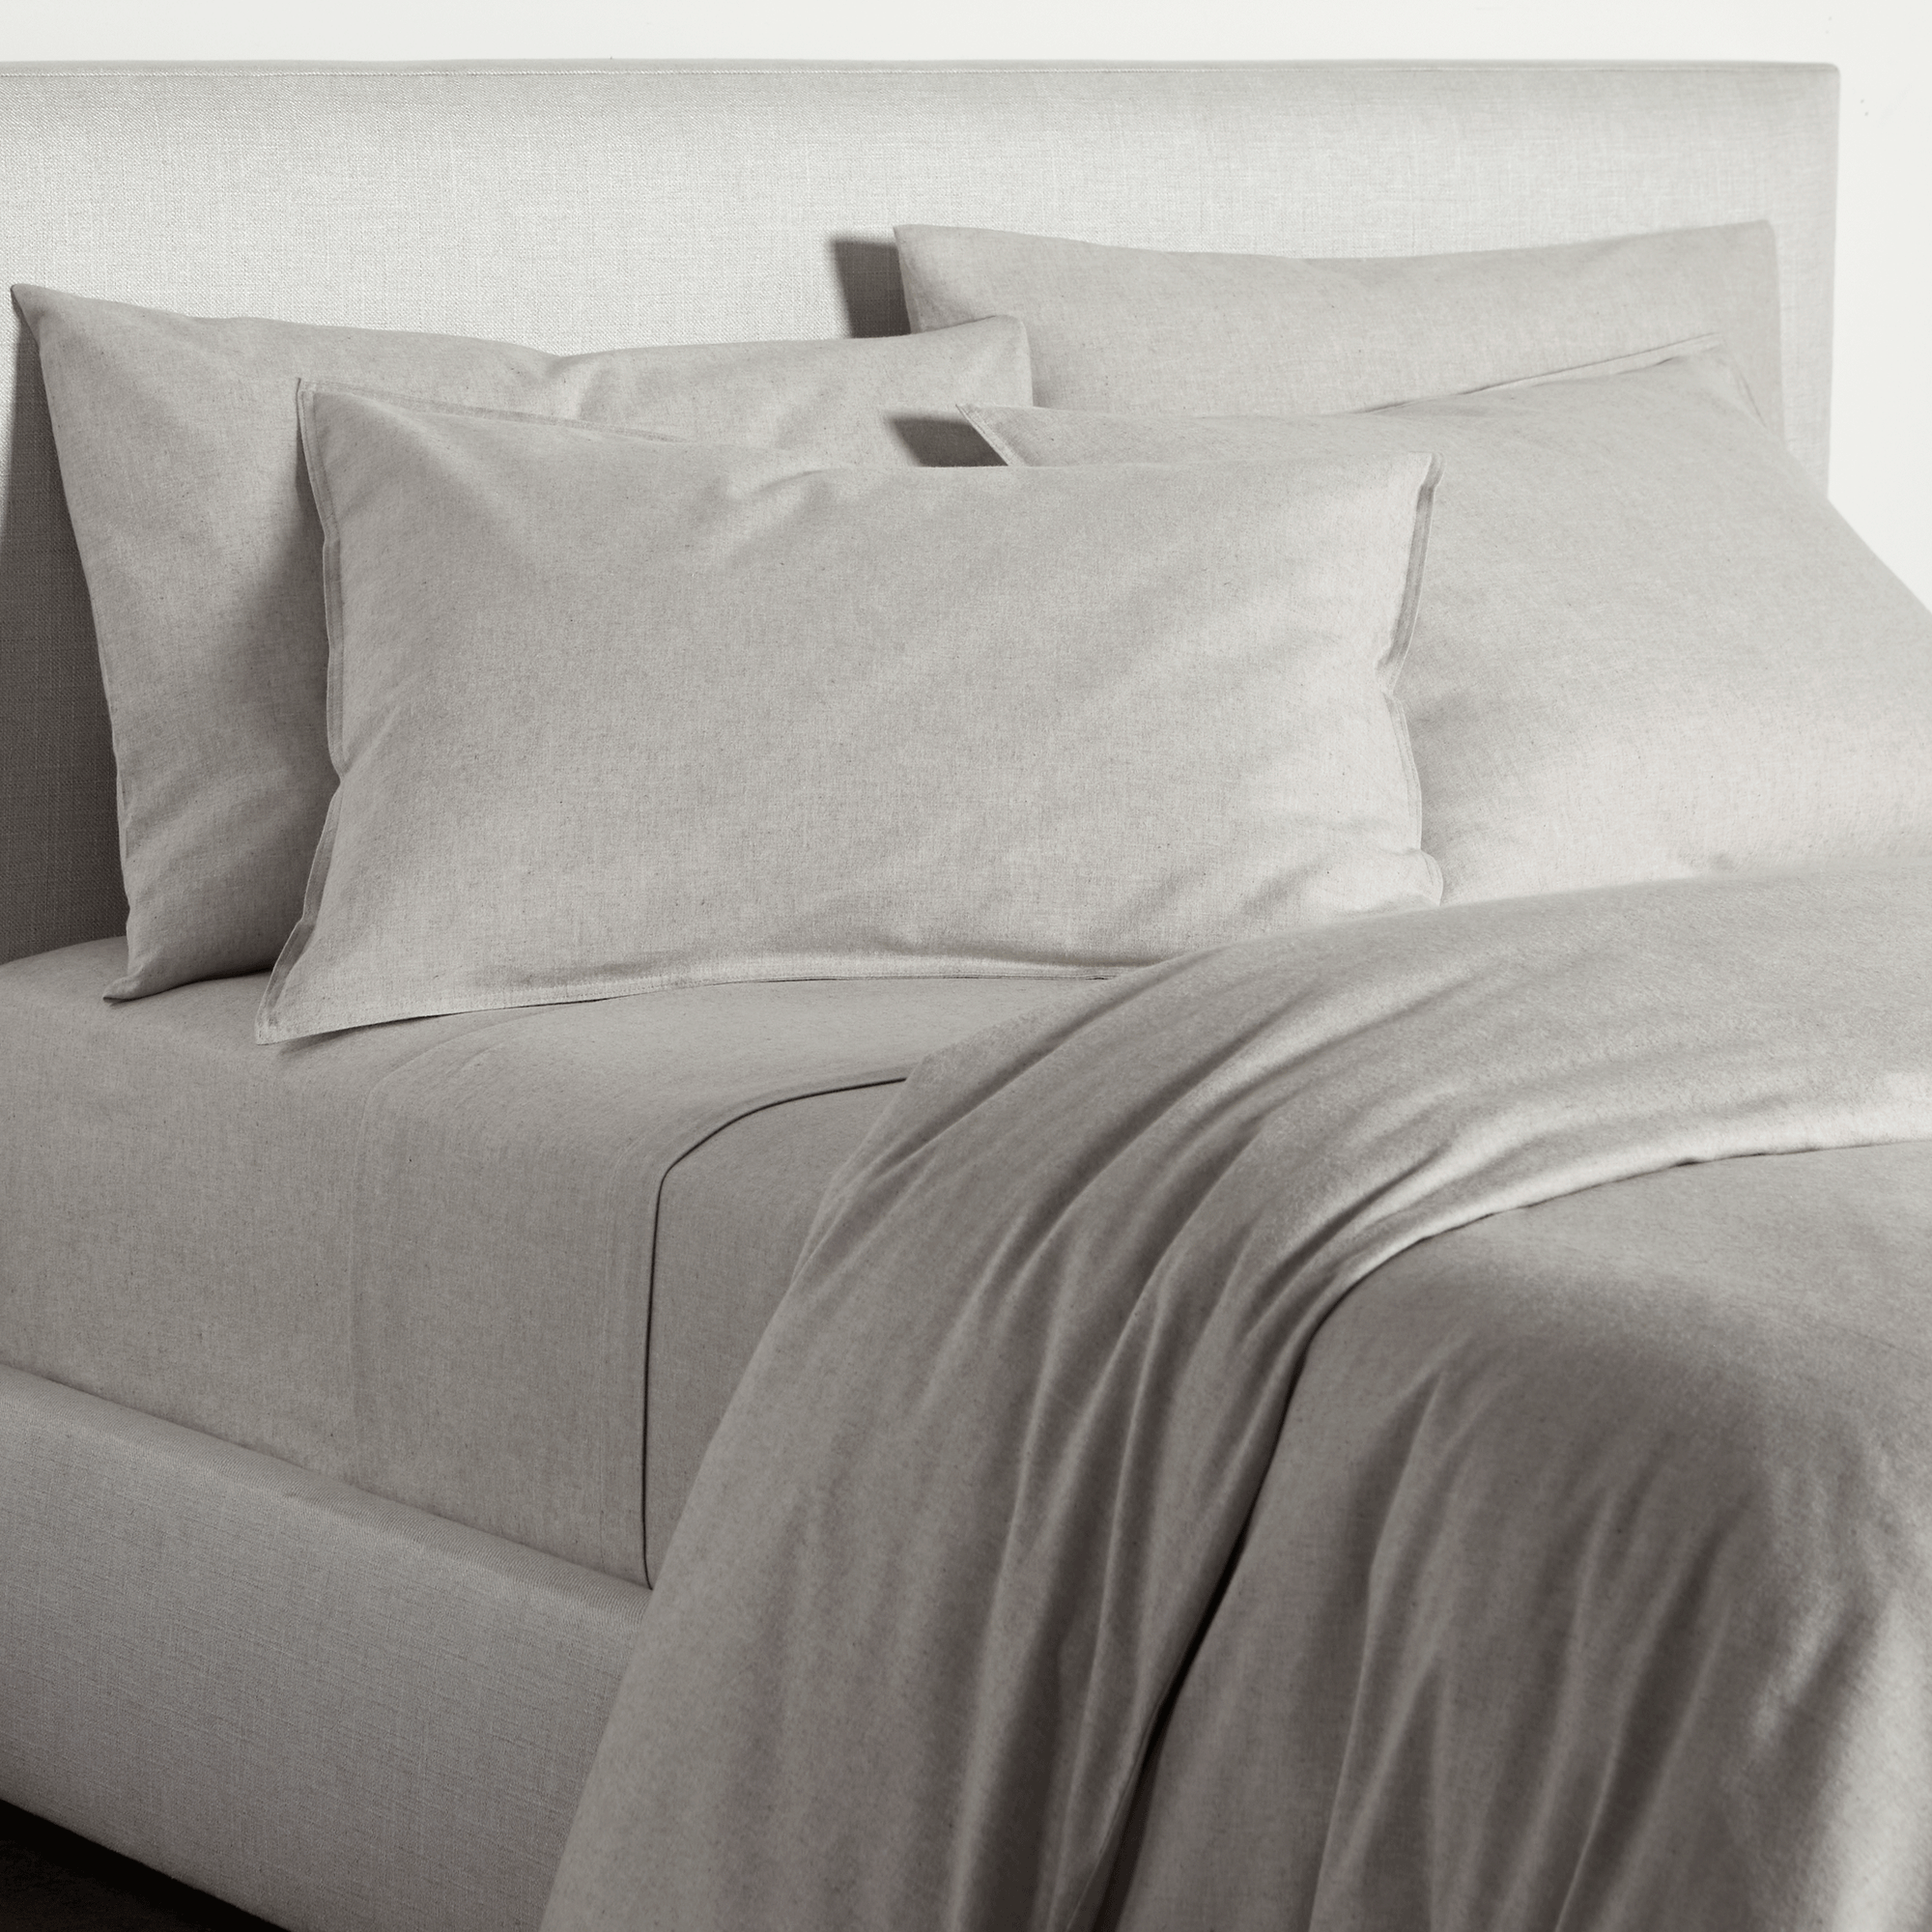 Produced in Portugal exclusively for Elte, the luxuriously soft Flannel Collection is sure to keep you warm and cozy.